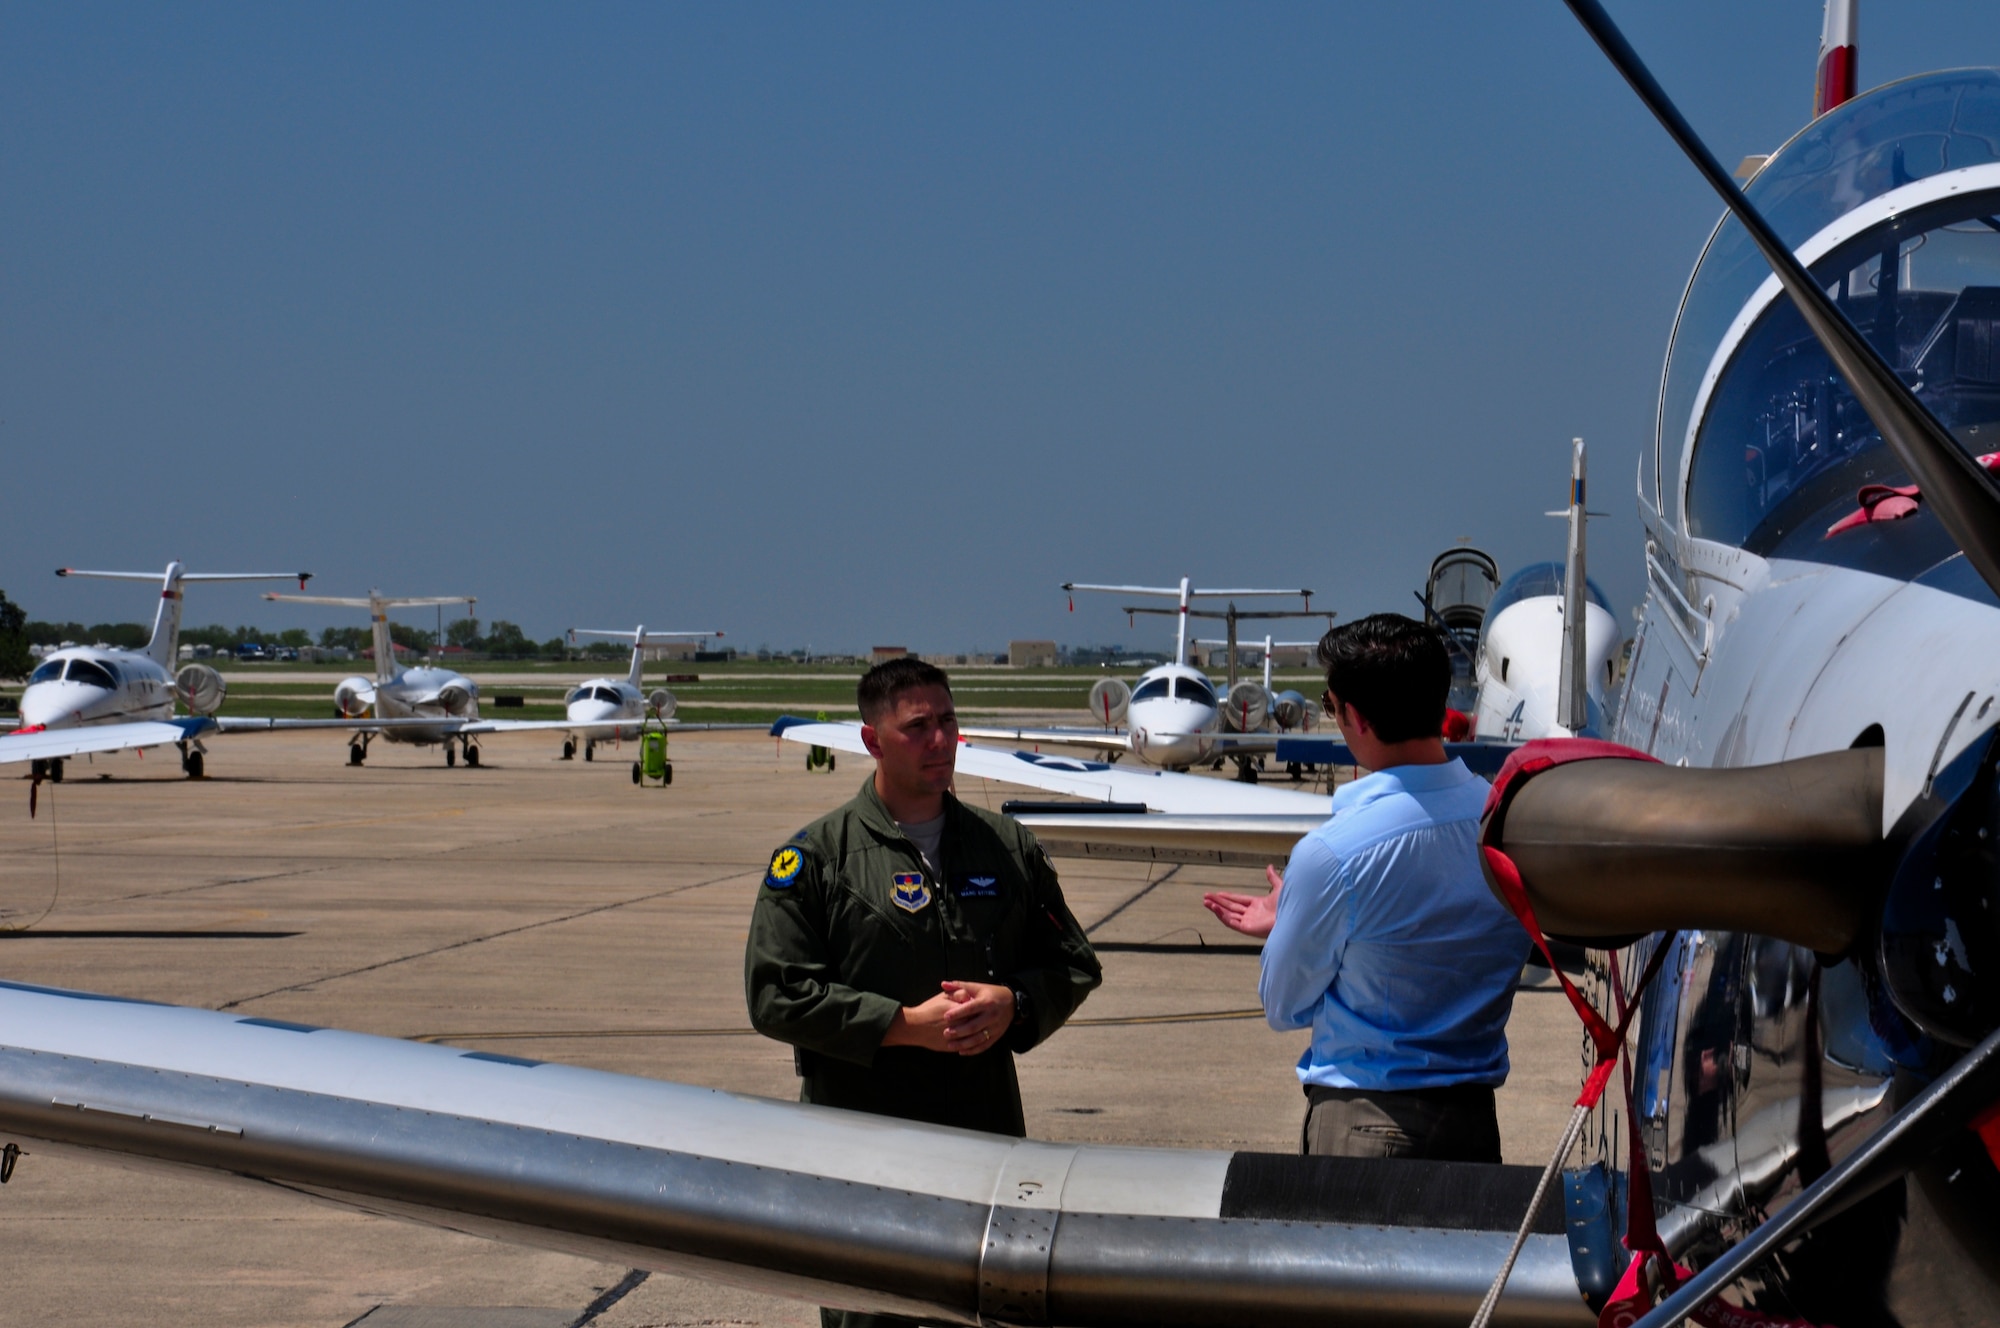 Lt. Col. Stitzel, 455th Flying Training Squadron director of operations, talks with Phil Anaya, KENS5 anchor and reporter, about the evacuation of aircraft from Naval Air Station Pensacola, Fla. to Joint Base San Antonio-Randolph,Texas, in preparation for Tropical Storm Isaac's landfall. (U.S. Air Force photo by 2nd Lt. Keenan Kunst)